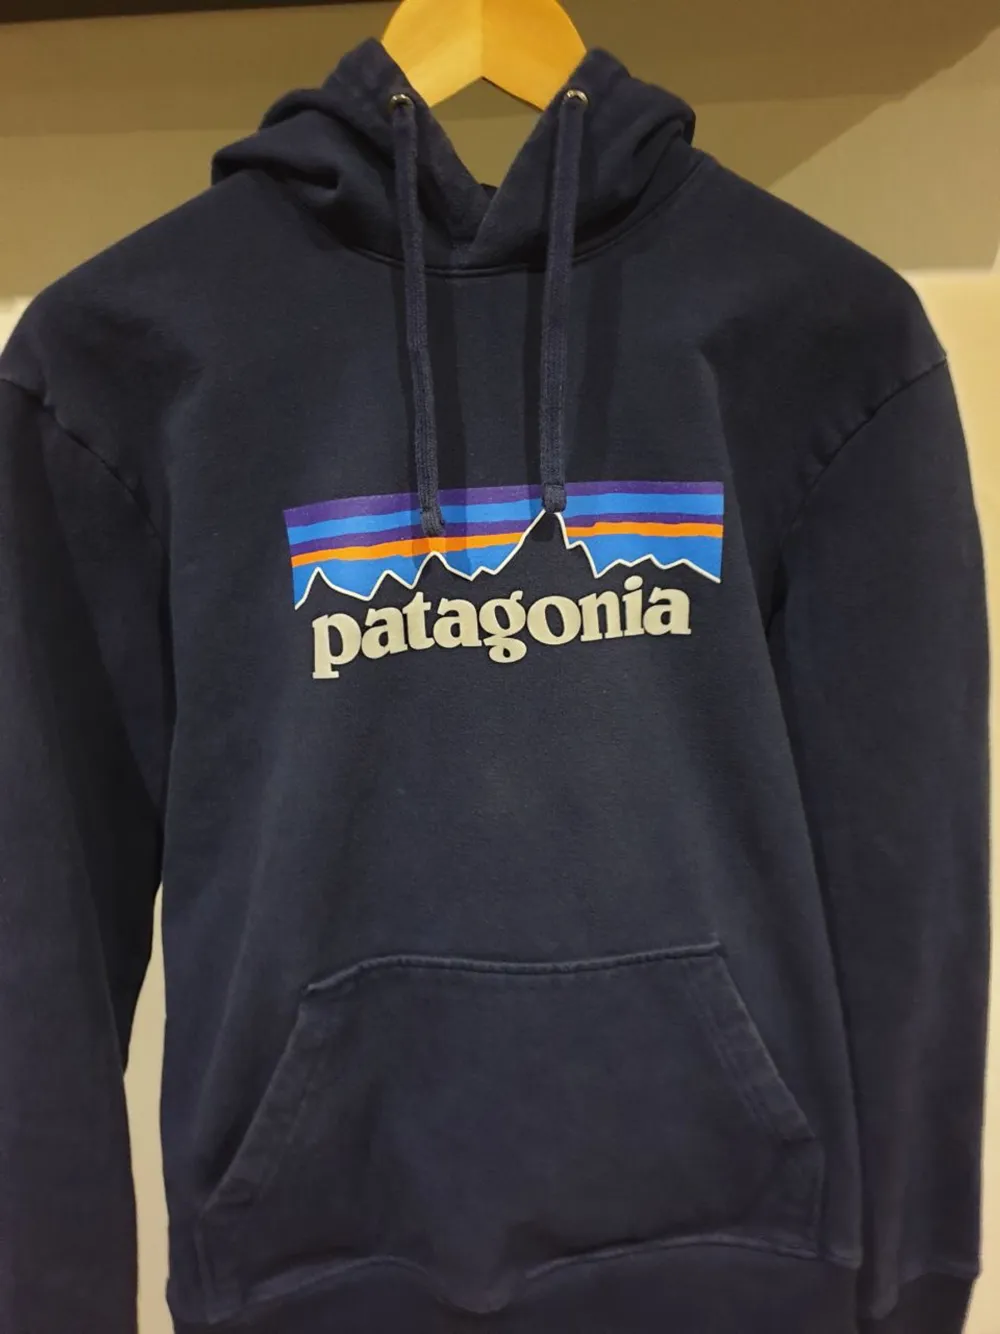 Hoodie from Patagonia M size Condition 9/10. Hoodies.